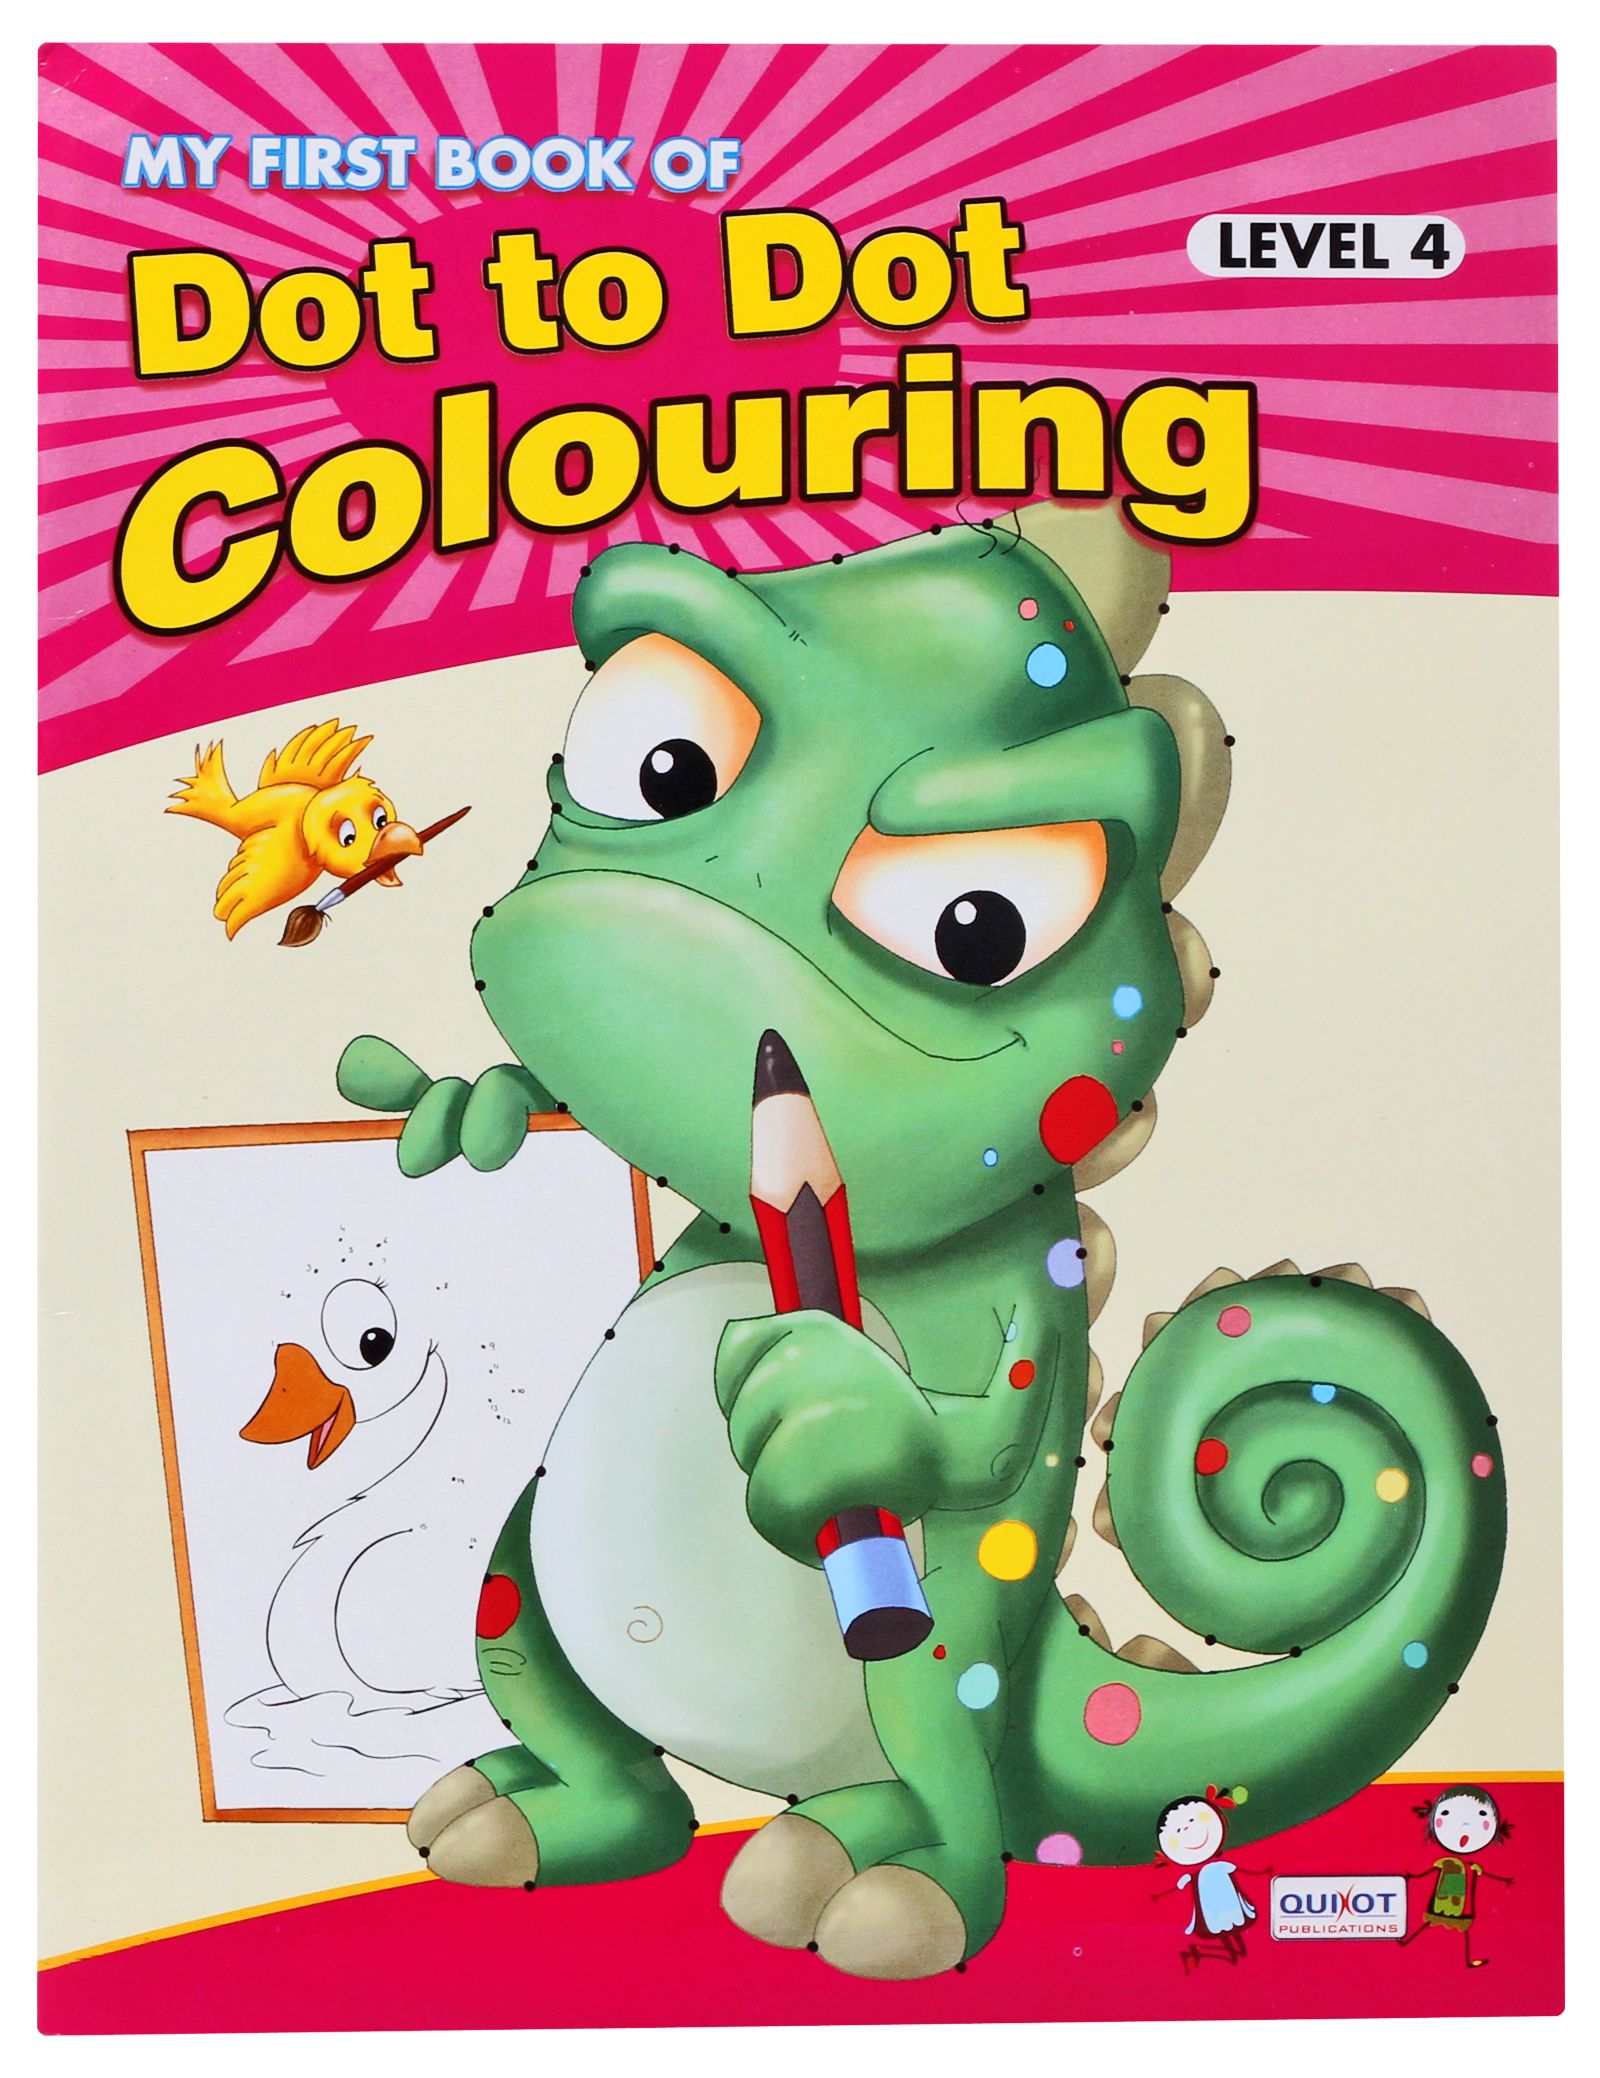 Quixot - My First Book of Dot-to-Dot Colouring